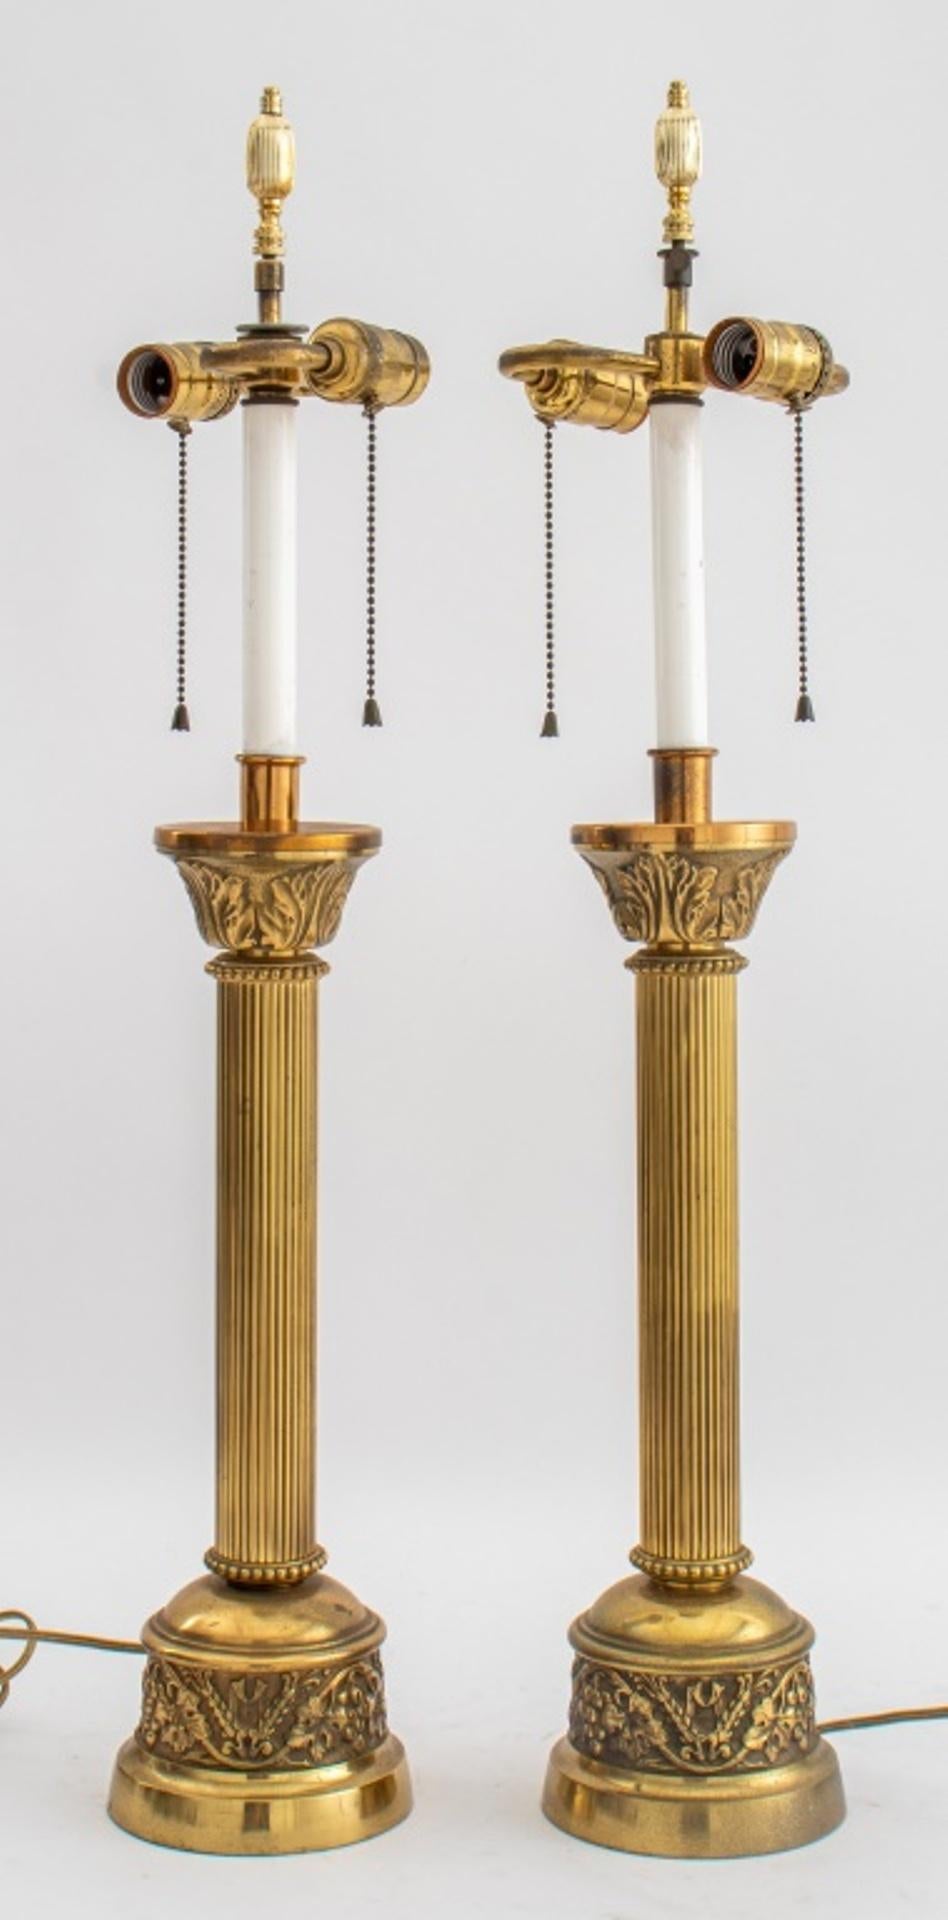 Pair of Neoclassical chased brass lamps, Corinthian column shape with vine and ears of wheat motif to base. Measures: Each: 29.5